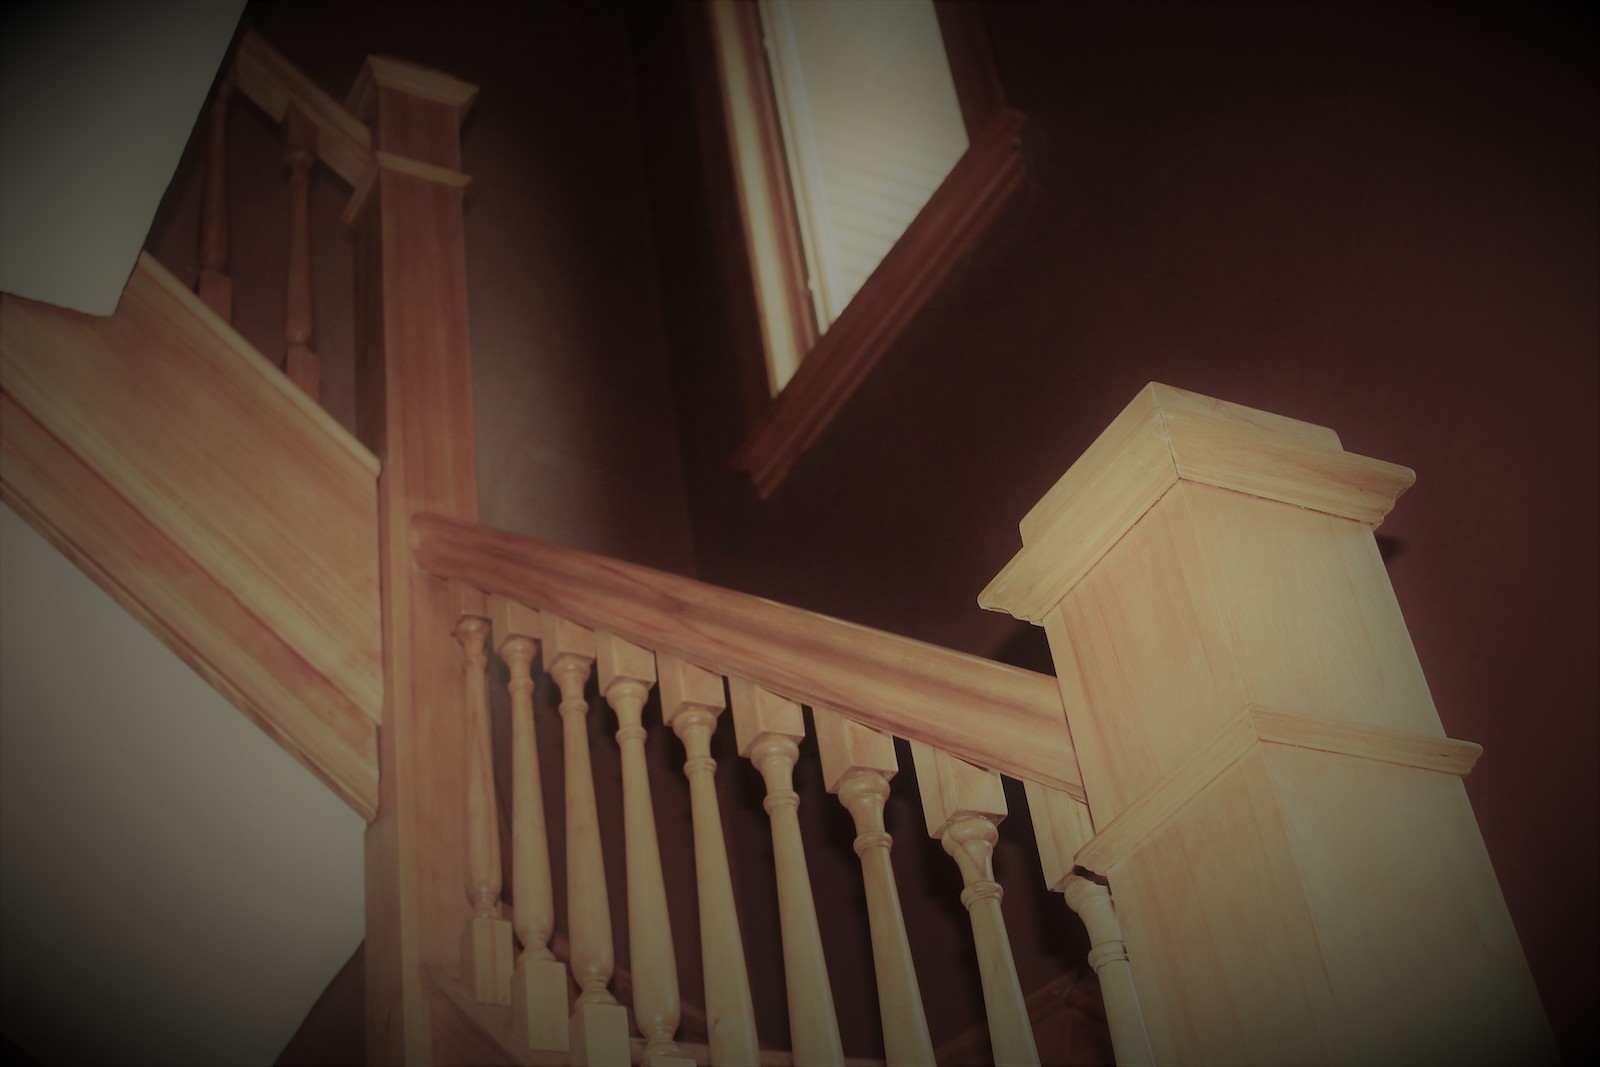 The staircase to the upstairs tenants apartment.